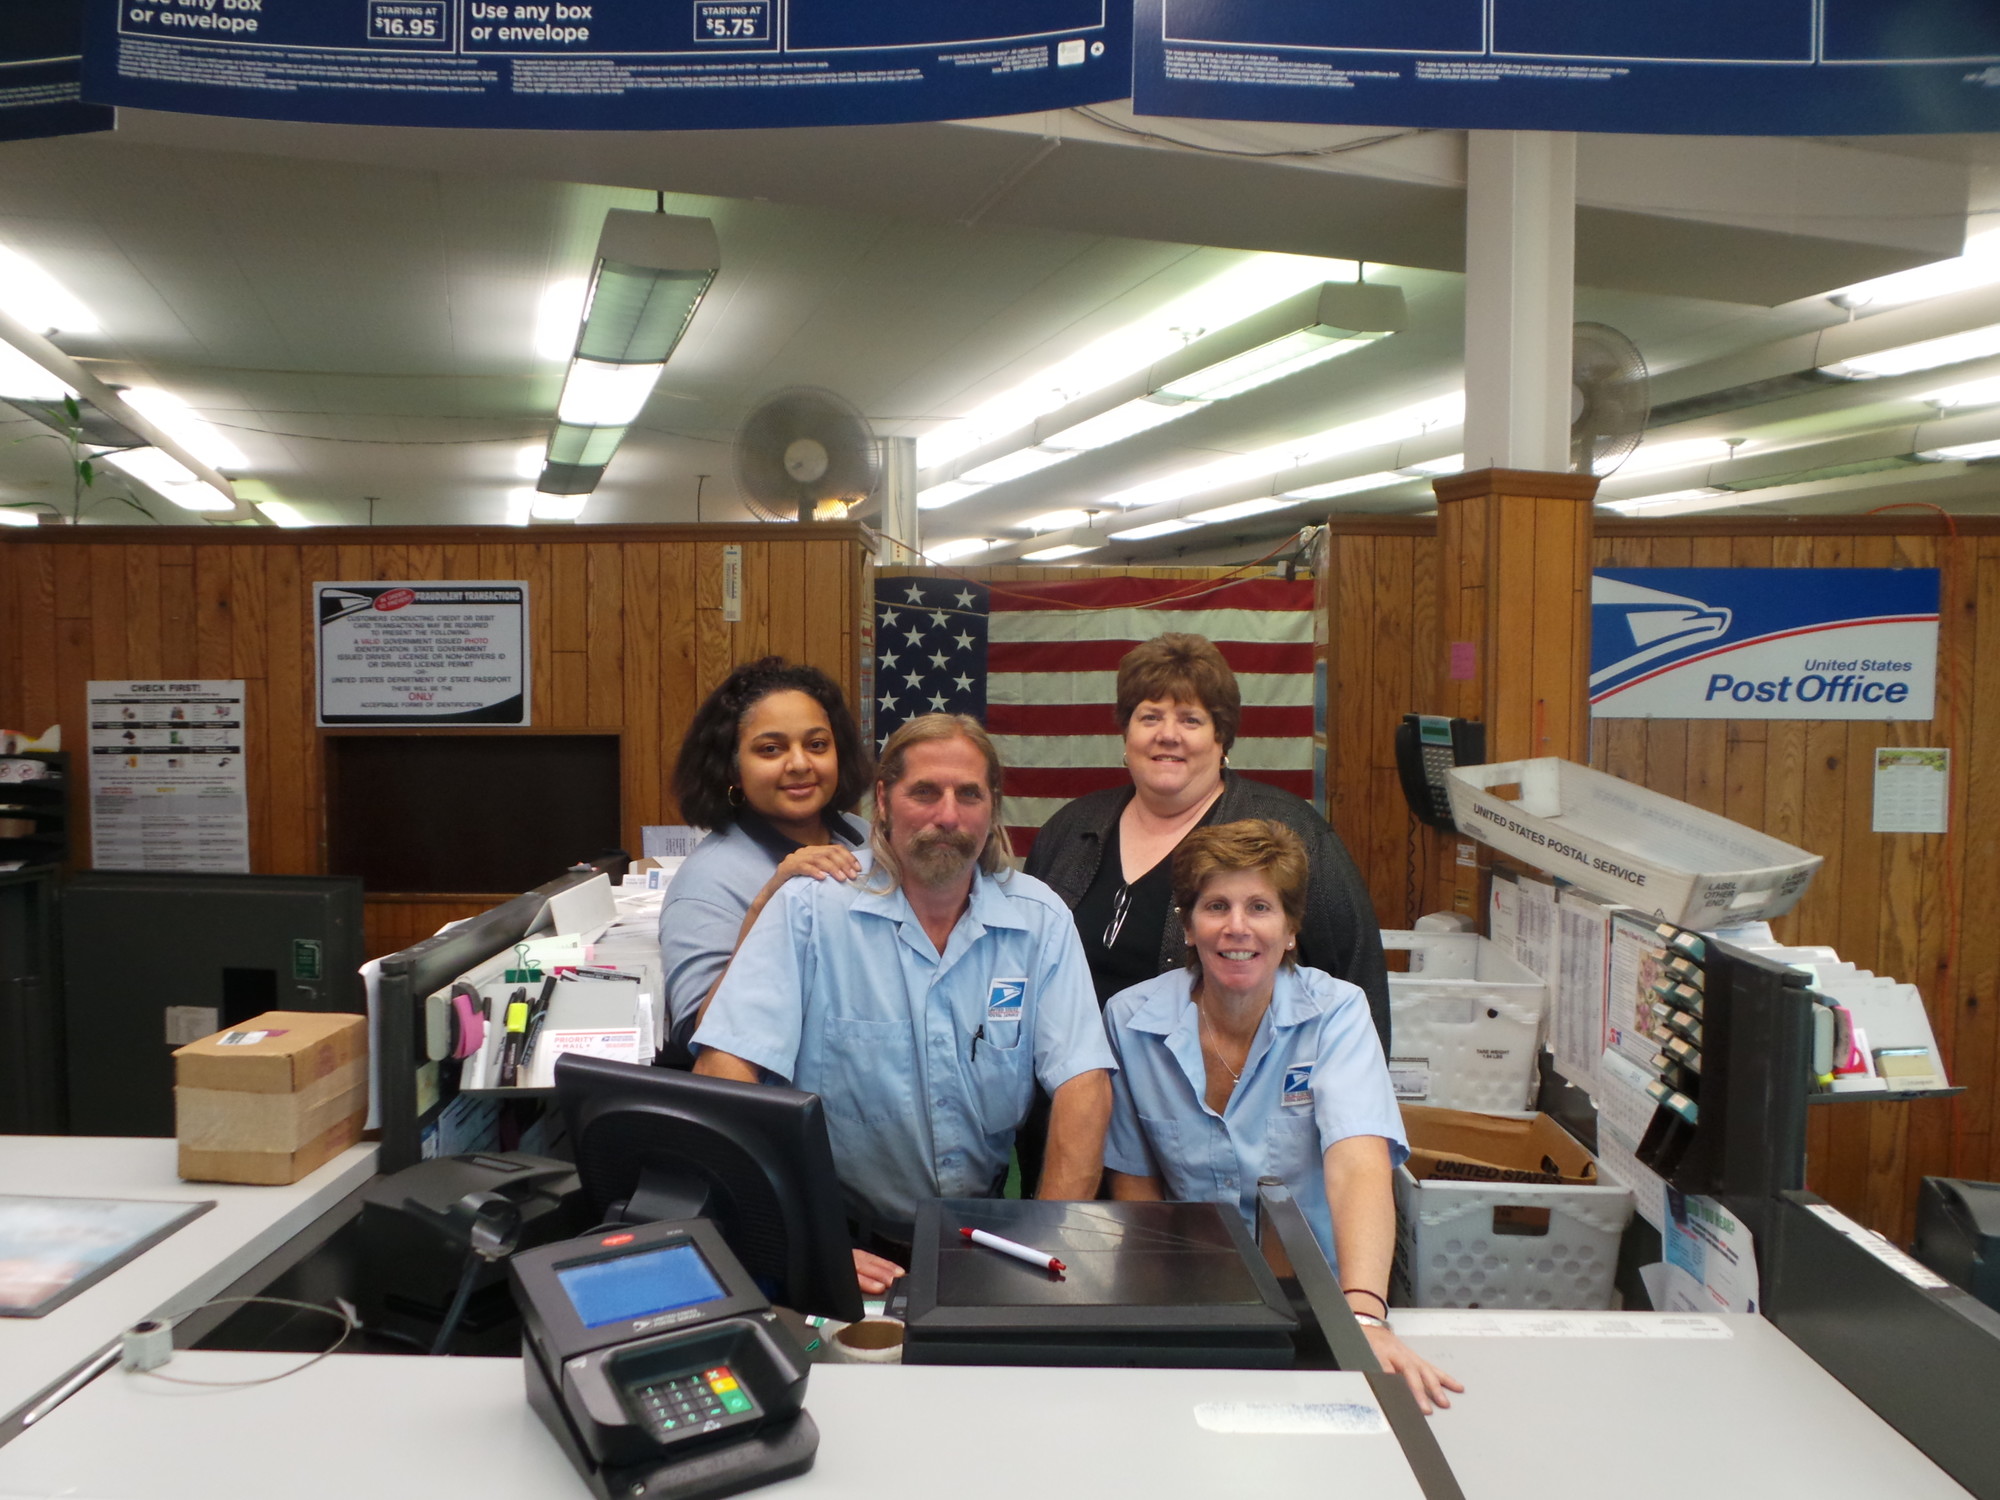 Some of the familiar faces from the Malverne post office include, from left, Sascha Singh, Ed Messina, Elizabeth Kelly and Janet Guido.